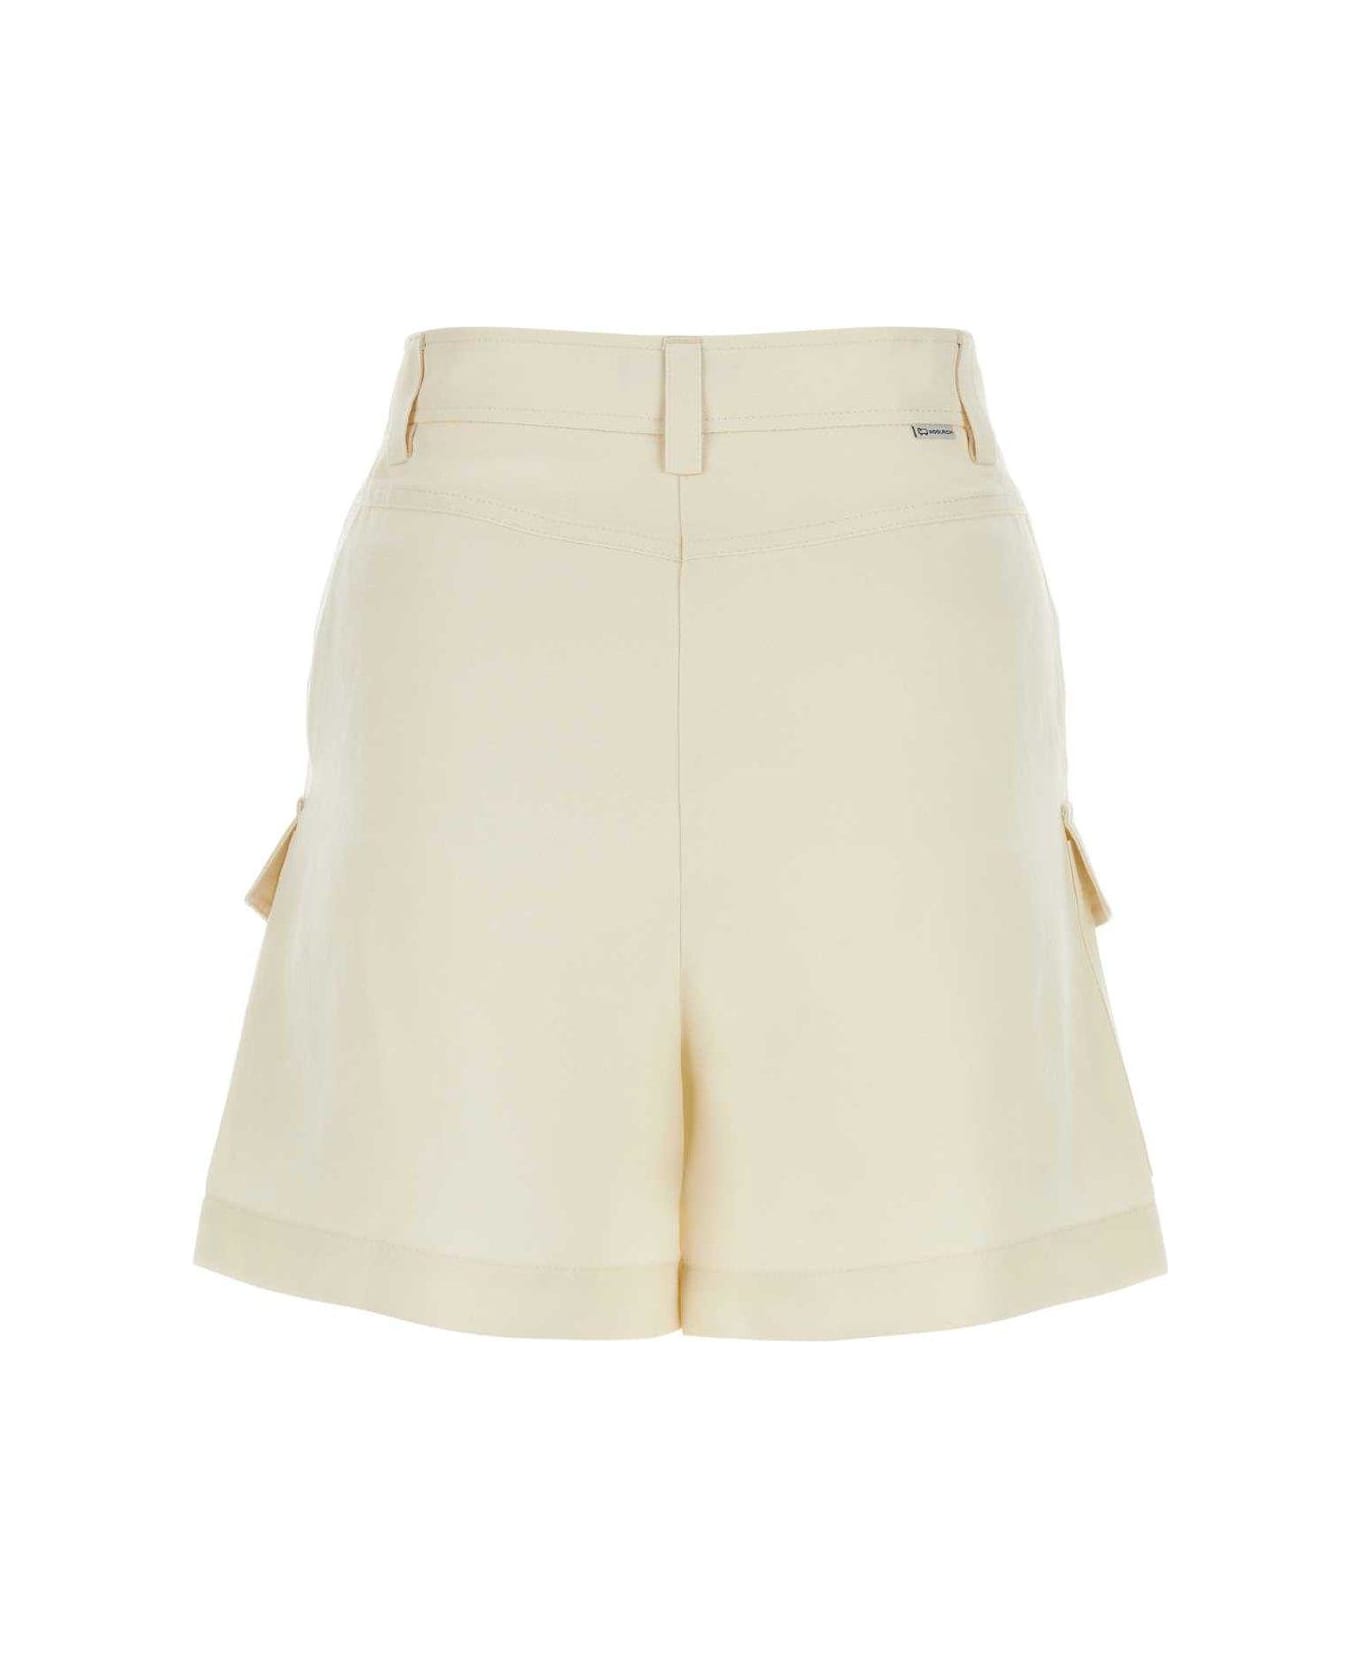 Woolrich Patched Side Pockets Shorts - Plaster White